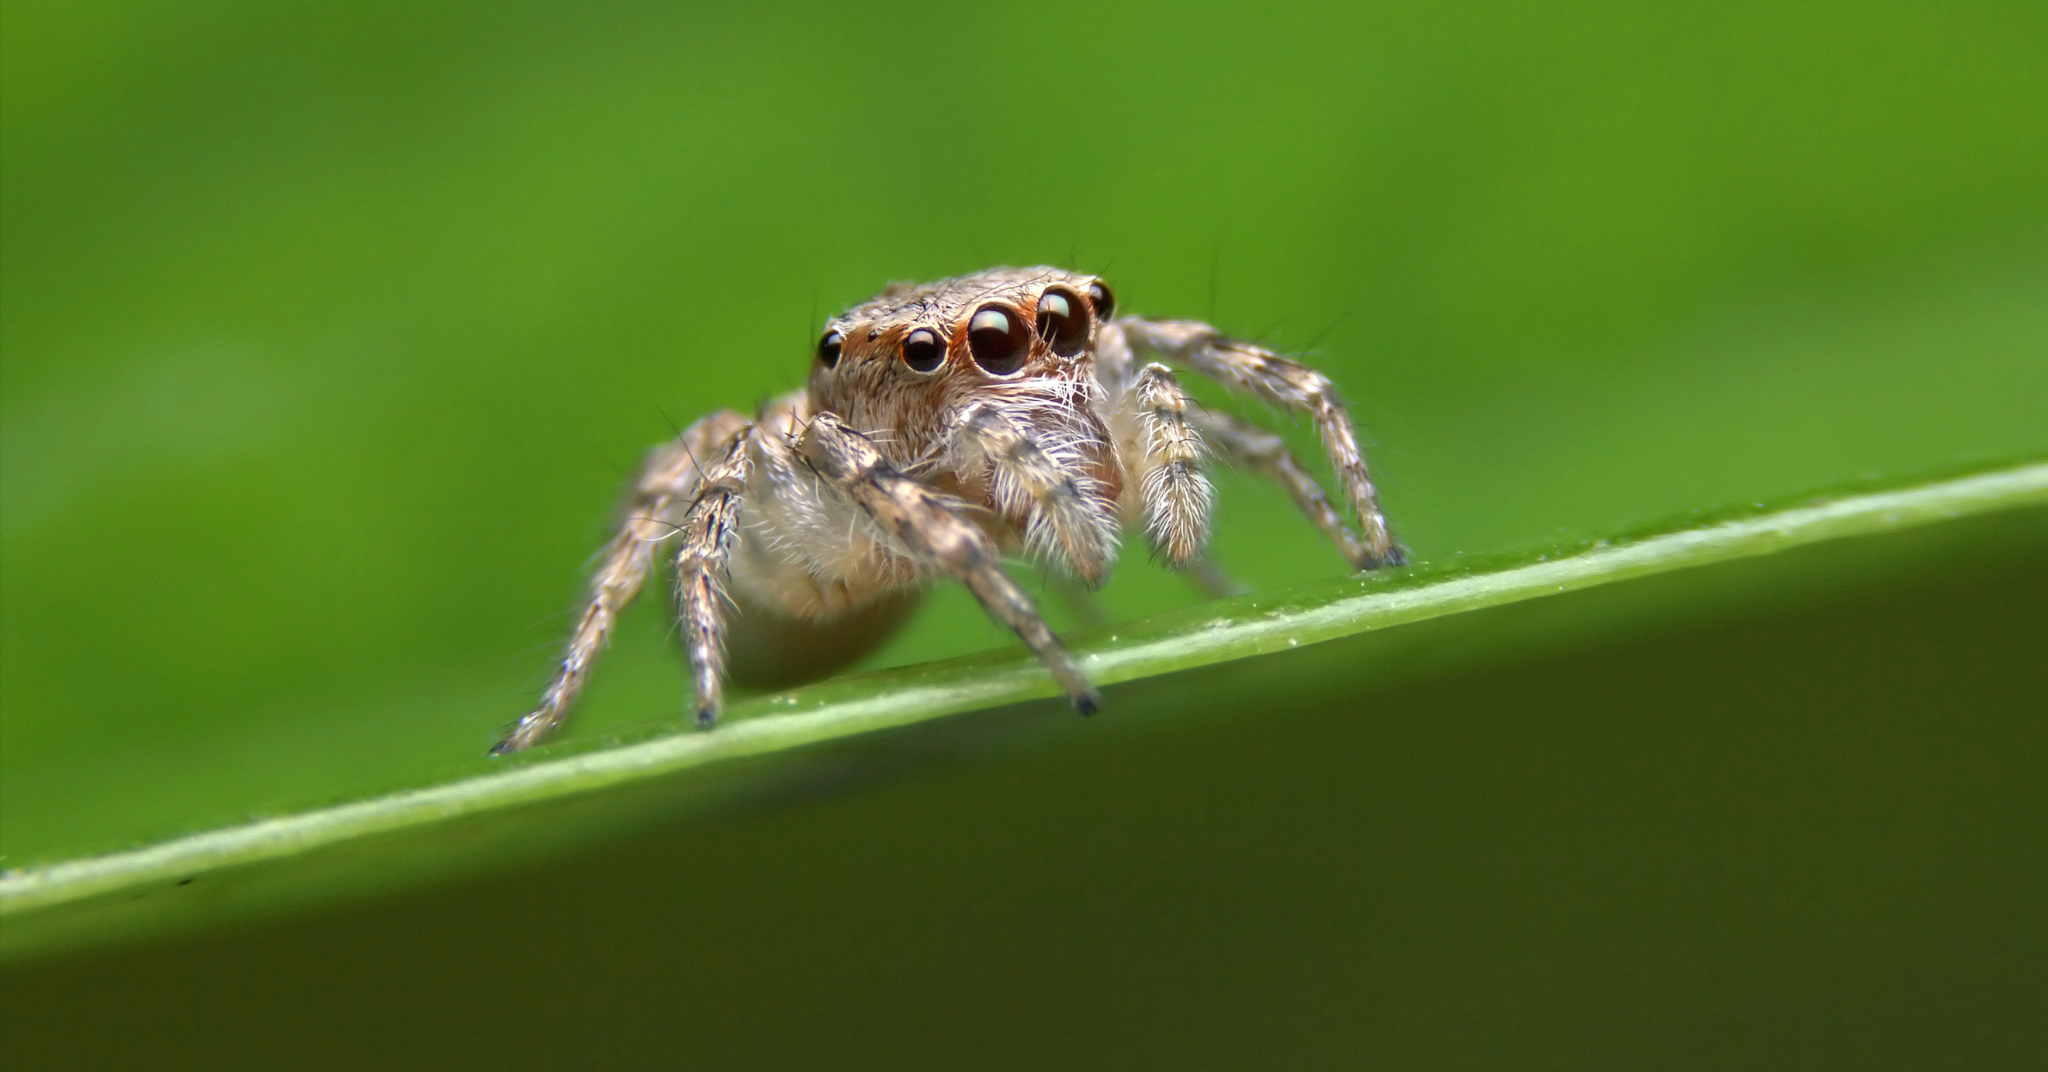 Are Jumping Spiders Poisonous?